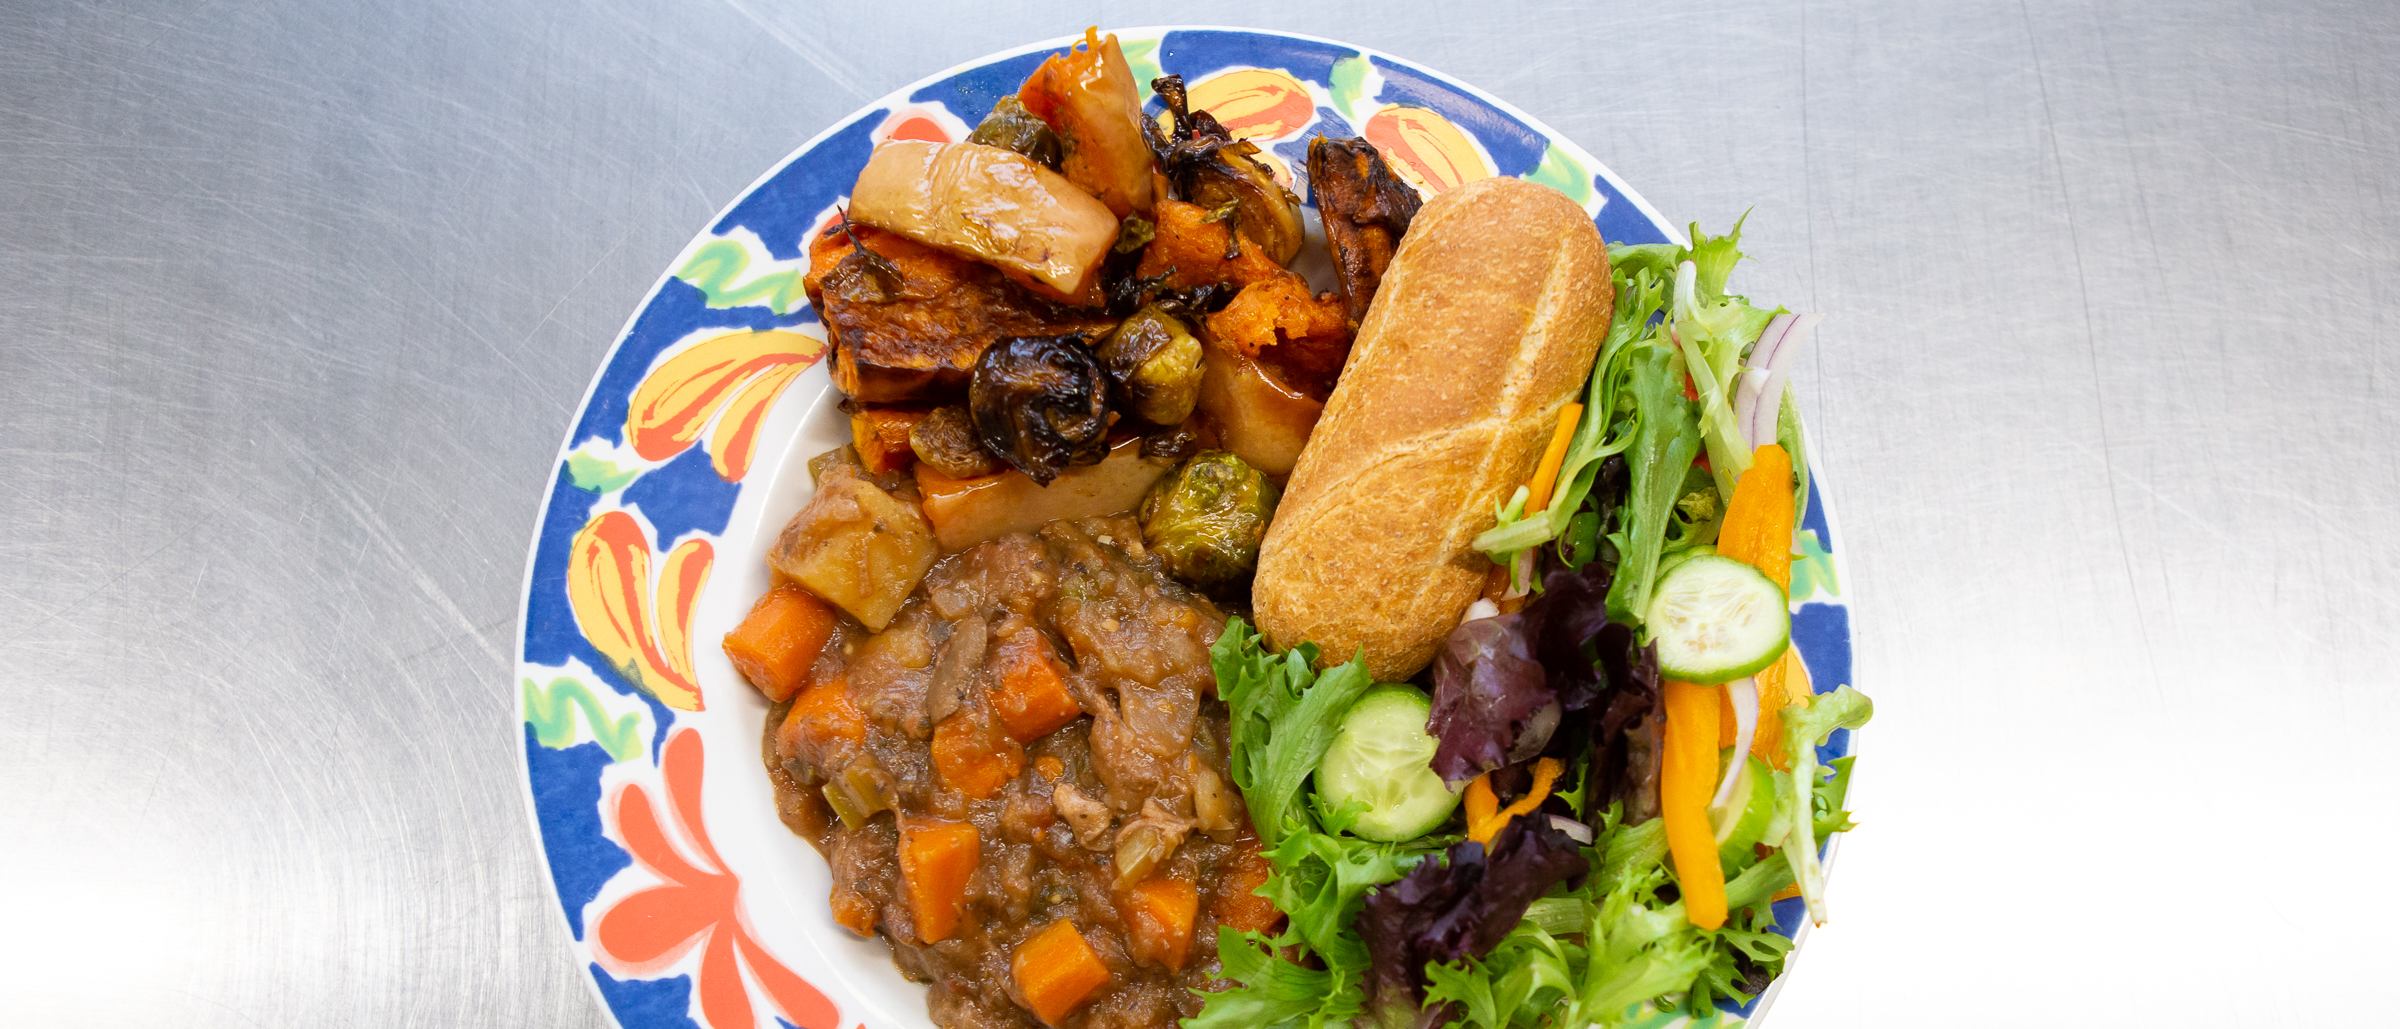 plate of stew, salad and bread roll on shiny table